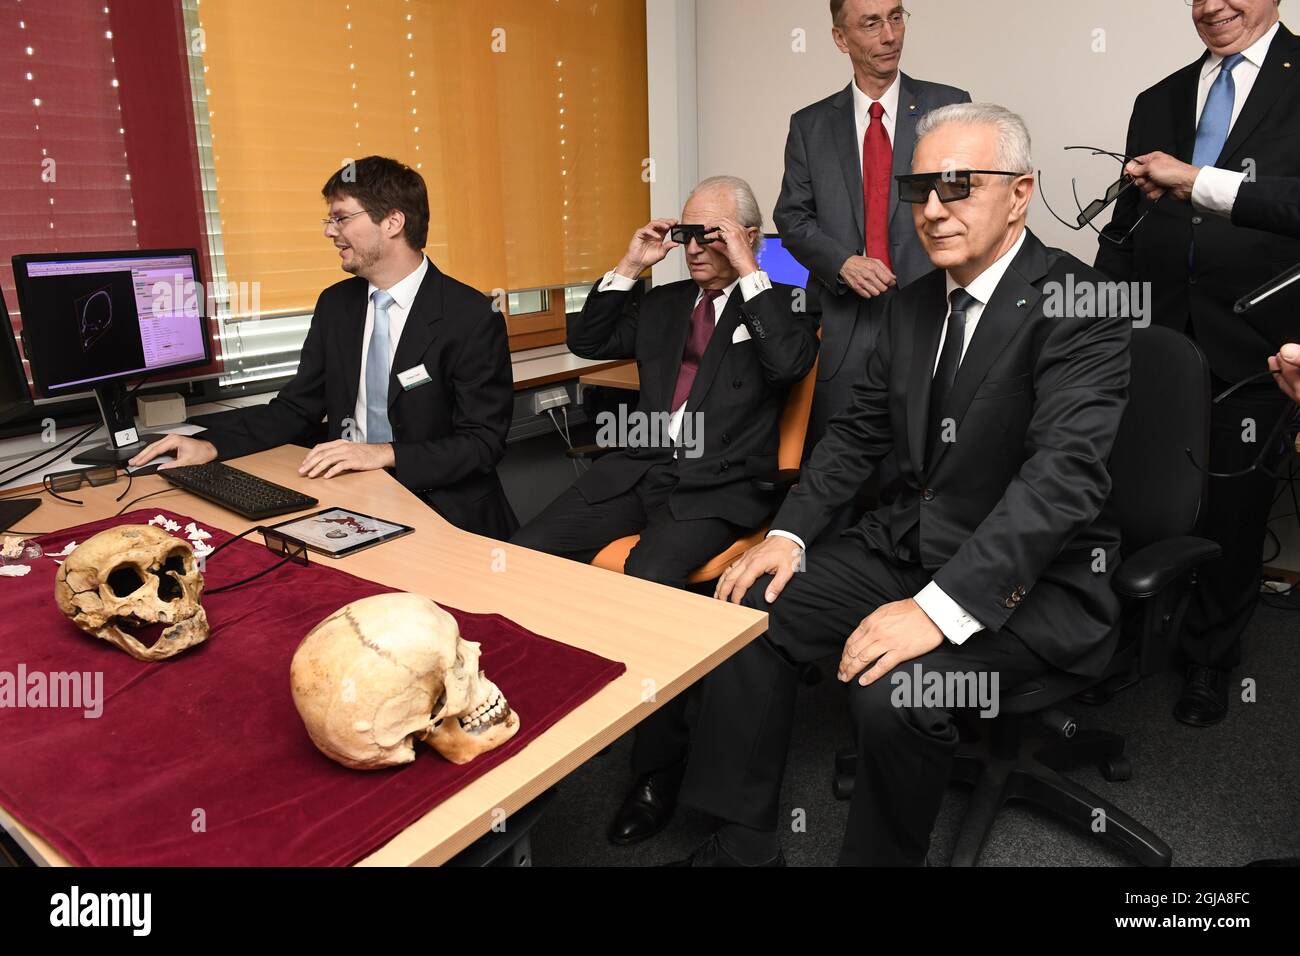 LEIPZIG 20161008 Sweden's King Carl Gustaf and Saxony's Minister President Stanislaw Tillich (right) visit Max Planck Institute for Evolutionary Anthropology in Leipzig on Saturday, Oct. 08, 2016, during the last day of the royal couples four-day state visit to Germany. Professor Svante Paabo (red tie) shows around on the premesis, with Dr Philipp Gunz (left). Photo Jonas Ekstromer / TT / code 10030  Stock Photo